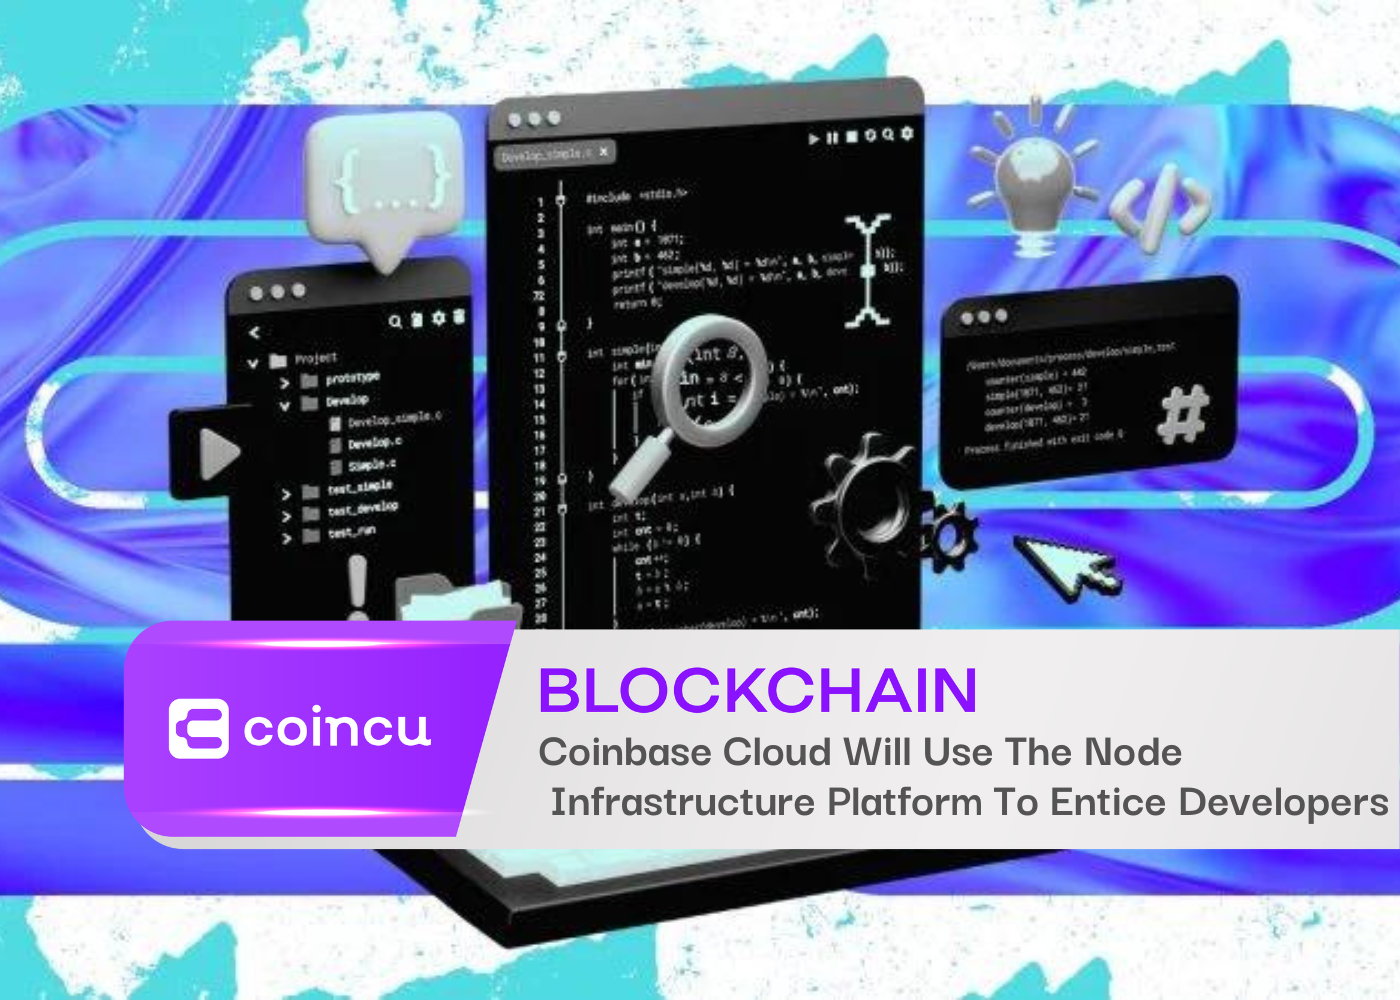 Coinbase Cloud Will Use The Node